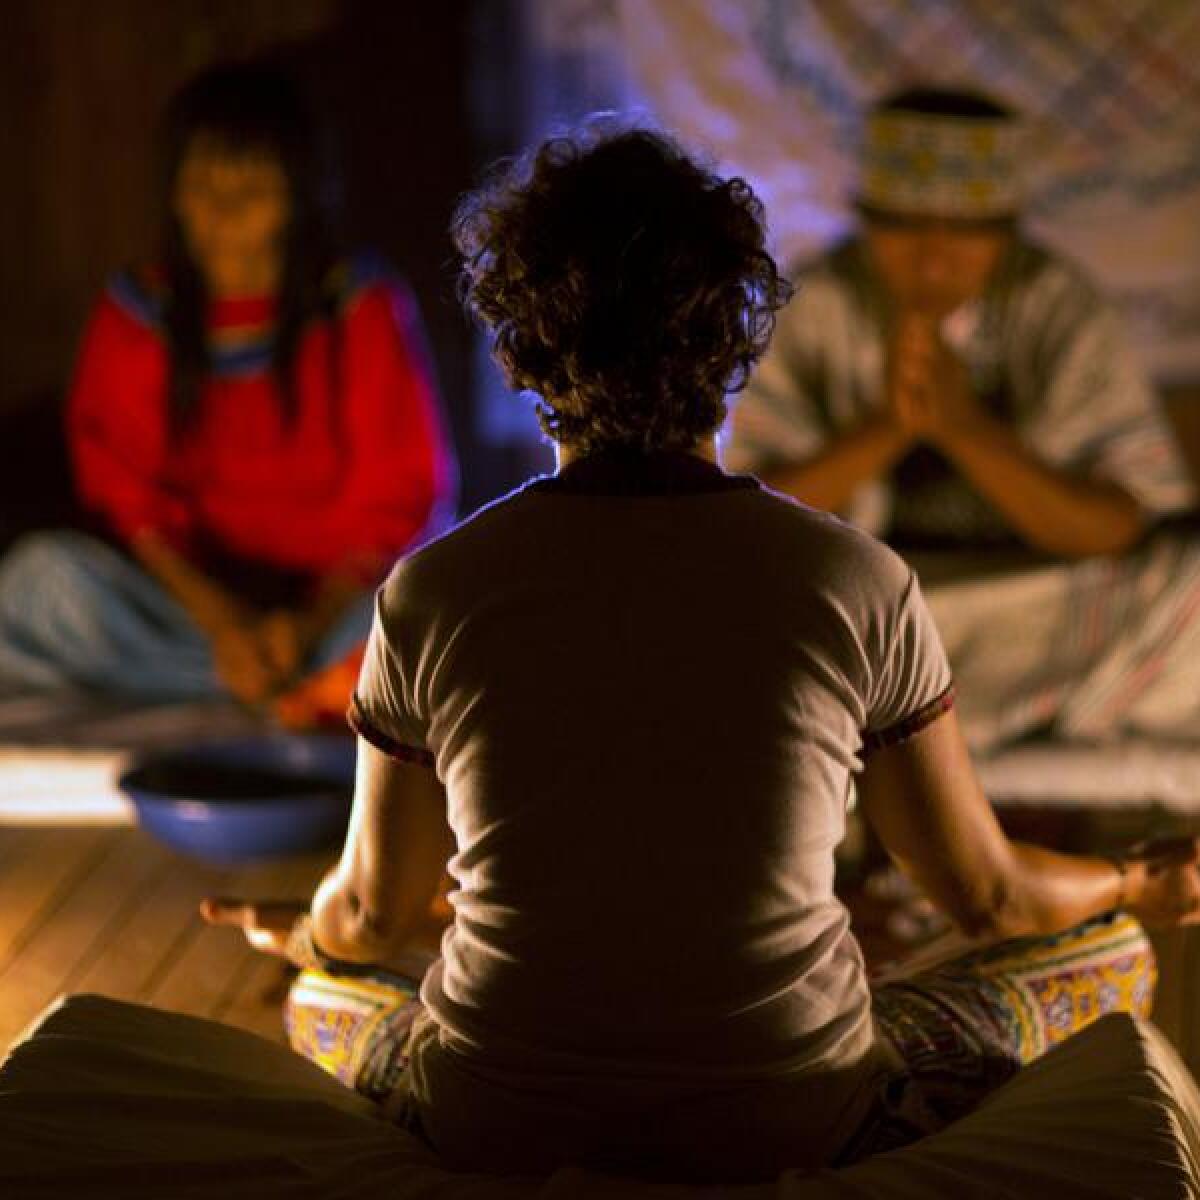 An ayahuasca session in Peru (file image)